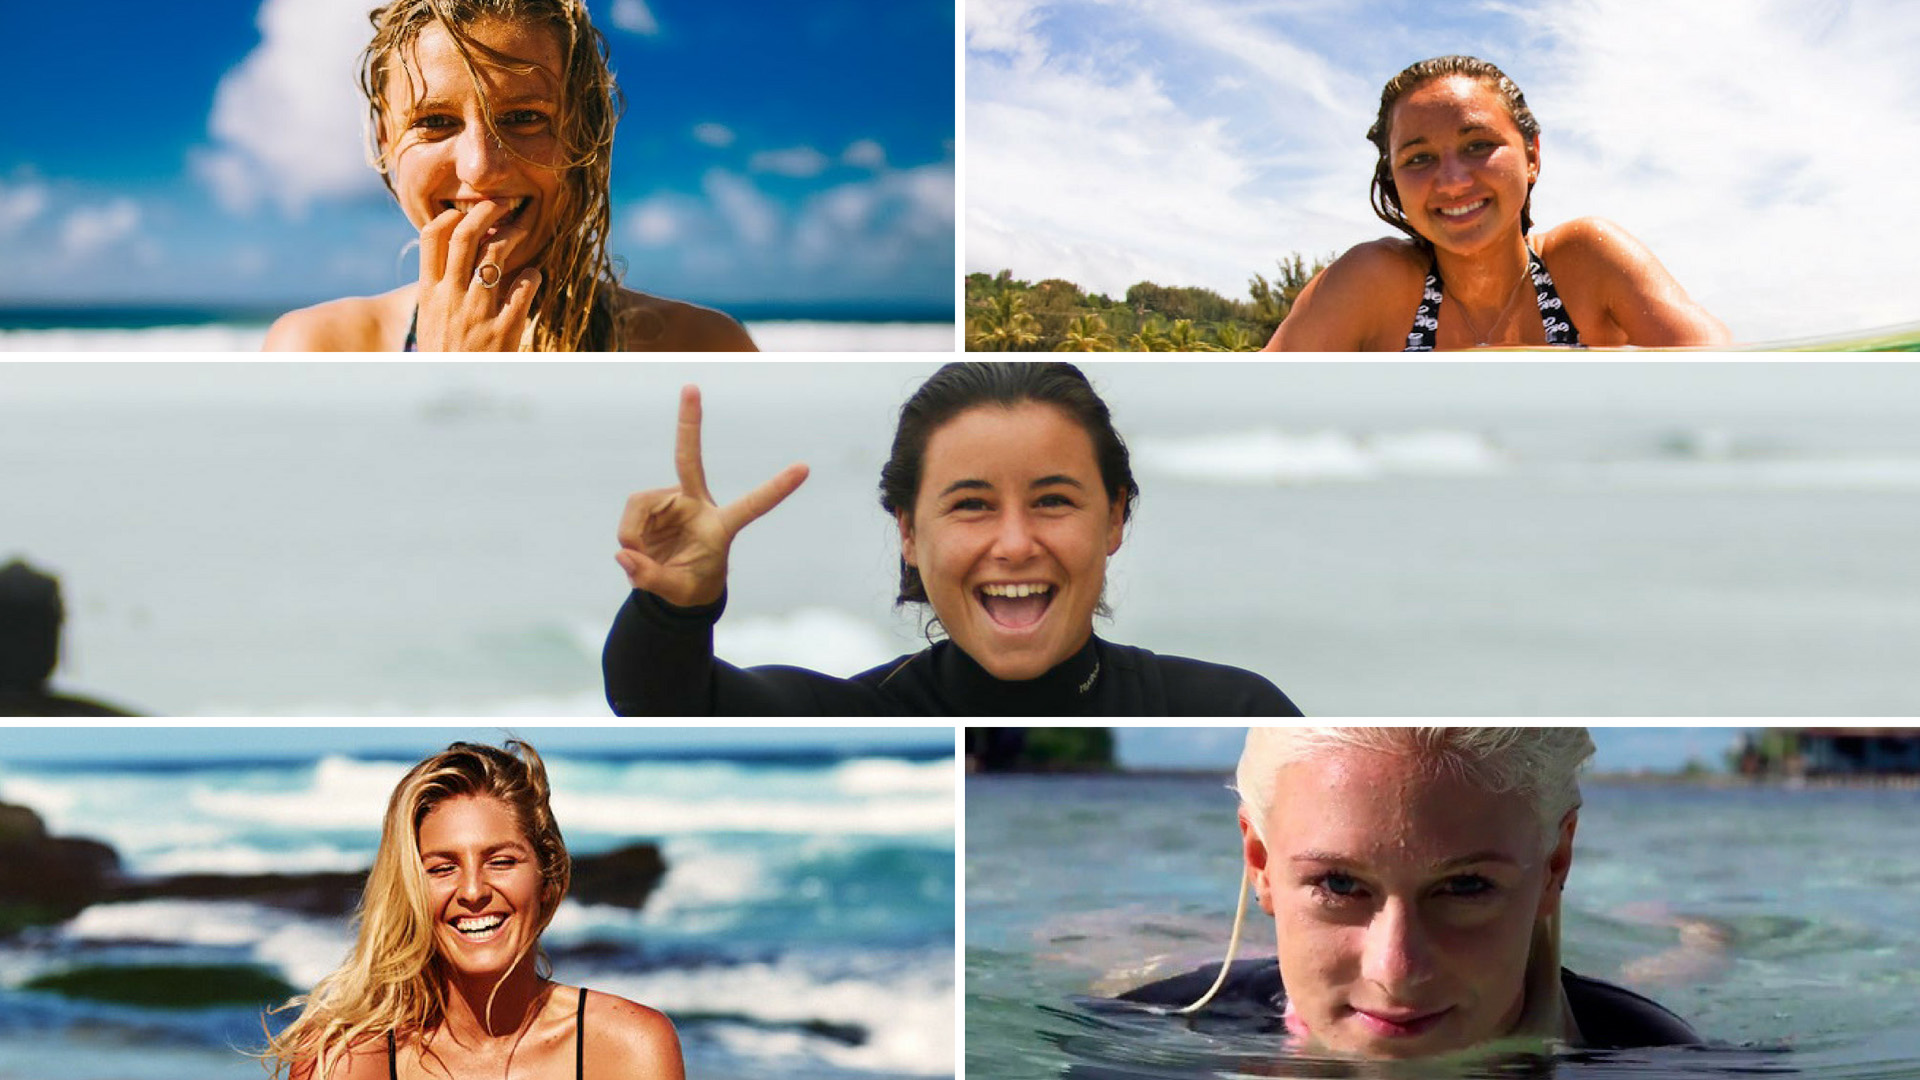 The Women Surfers In The World Surfd